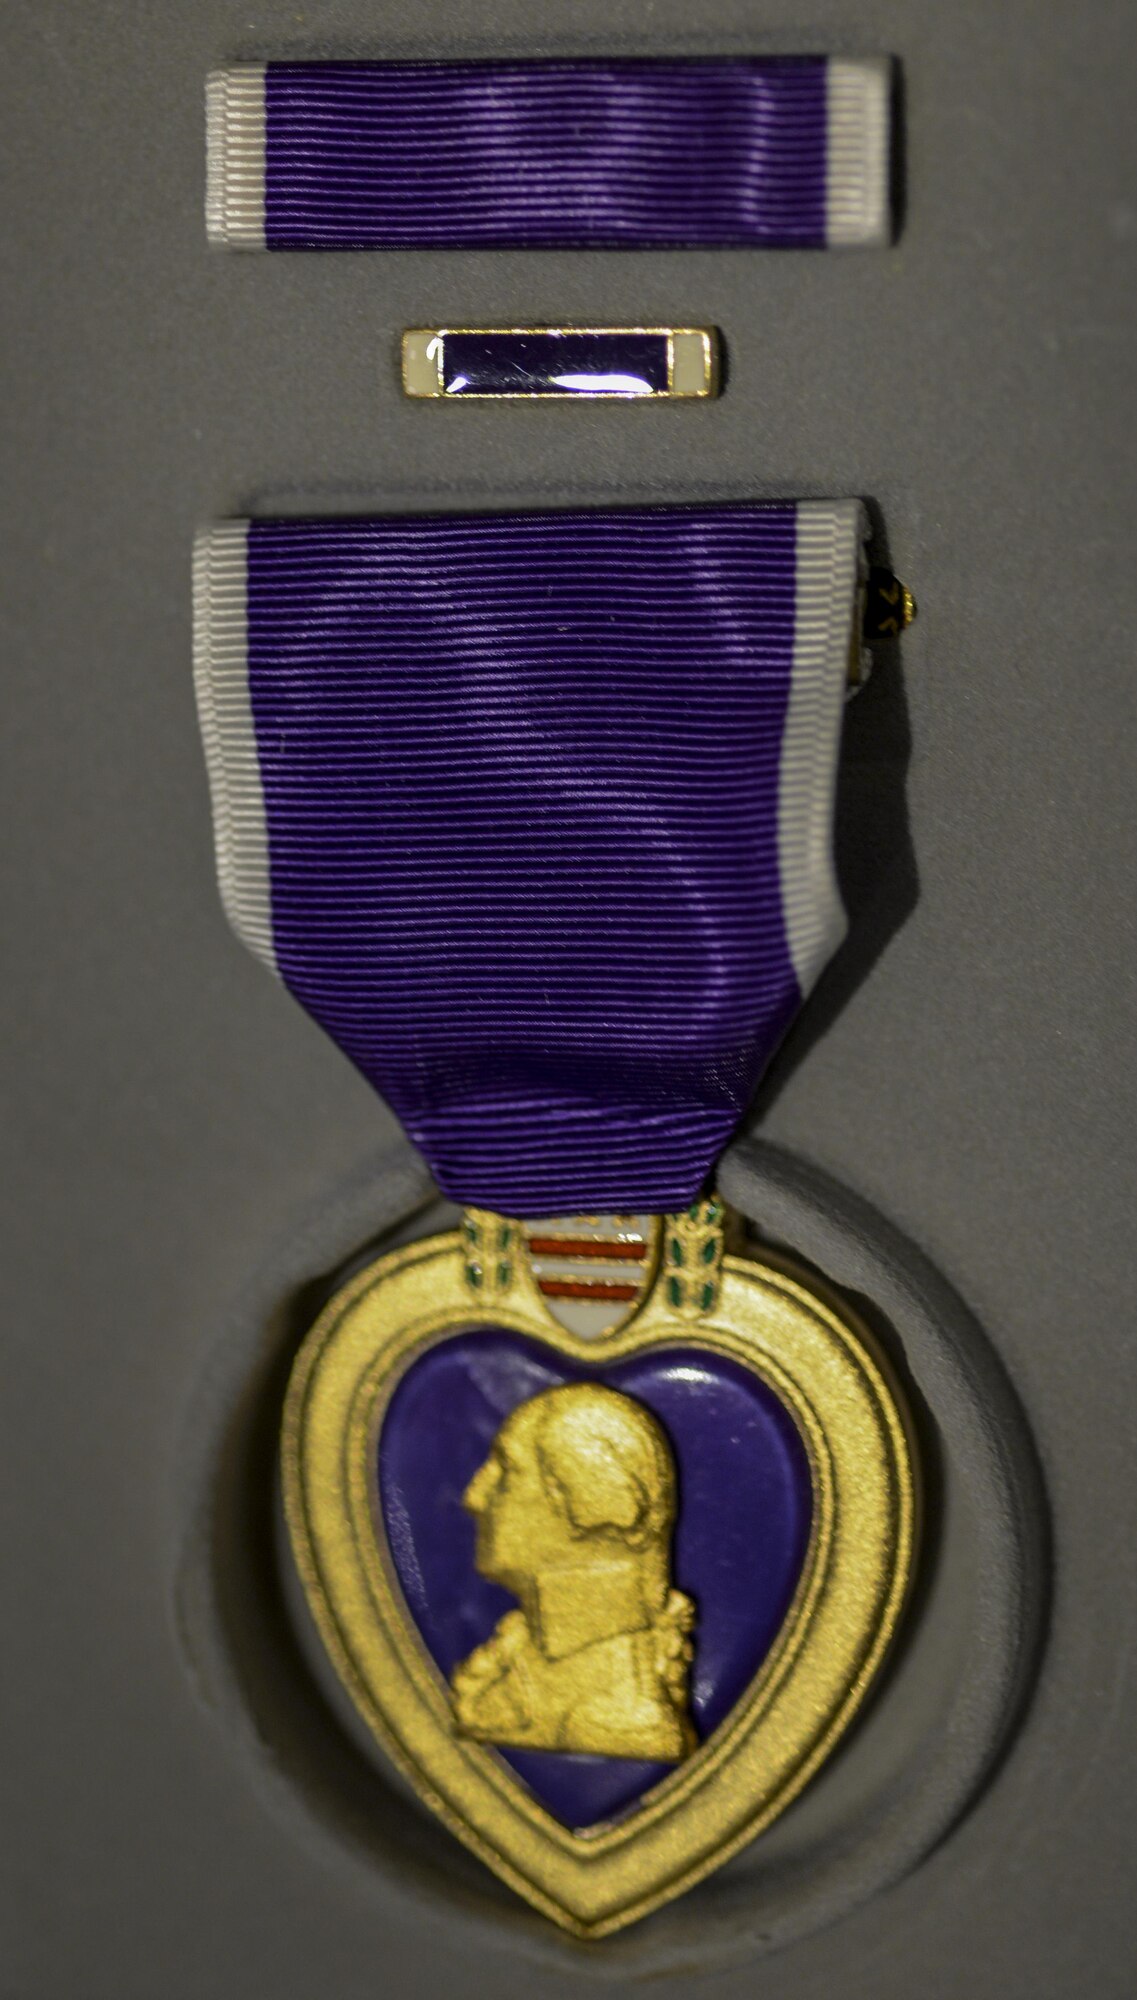 The Purple Heart was awarded to retired Airman 1st Class Julius Farrar at Nellis Air Force Base, Nev., April 28, 2016. On August 7, 1782 during the revolutionary war, General George Washington issued an order establishing the honorary badge of distinction: The Purple Heart. (U.S. Air Force photo by Airman 1st Class Kevin Tanenbaum)